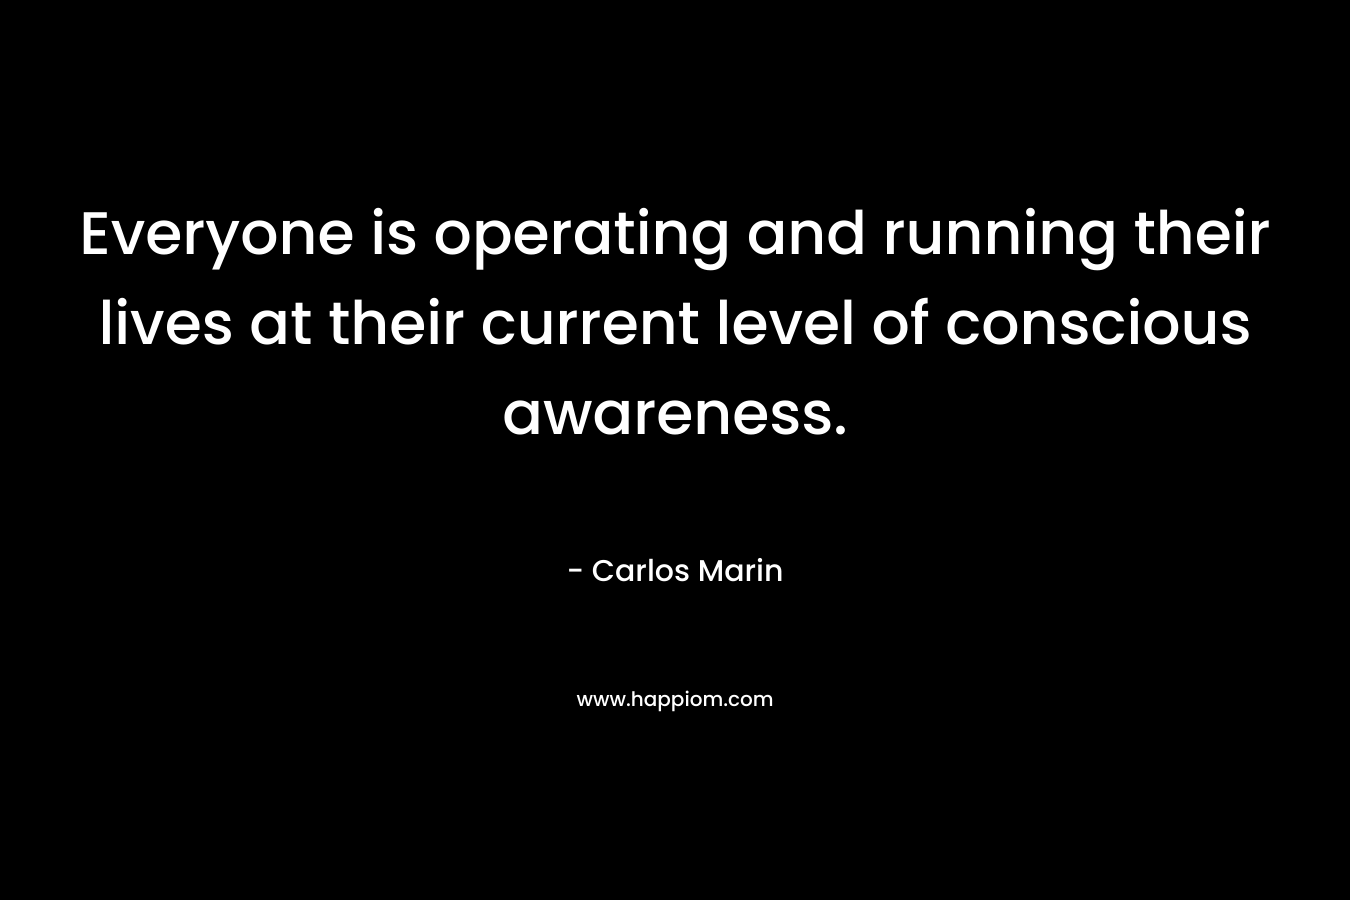 Everyone is operating and running their lives at their current level of conscious awareness.